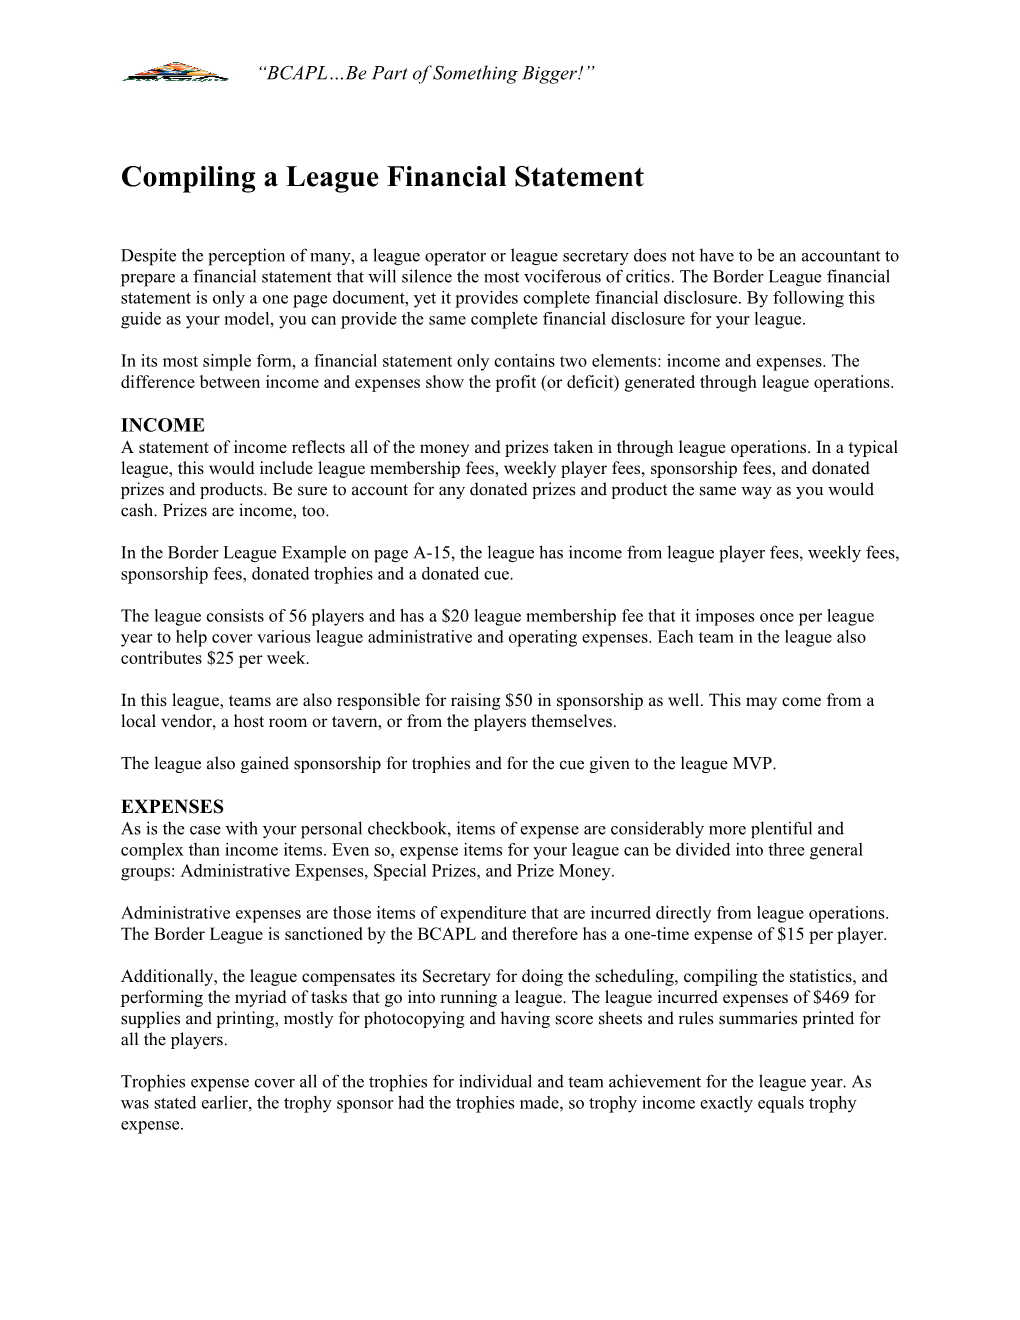 Compiling a League Financial Statement